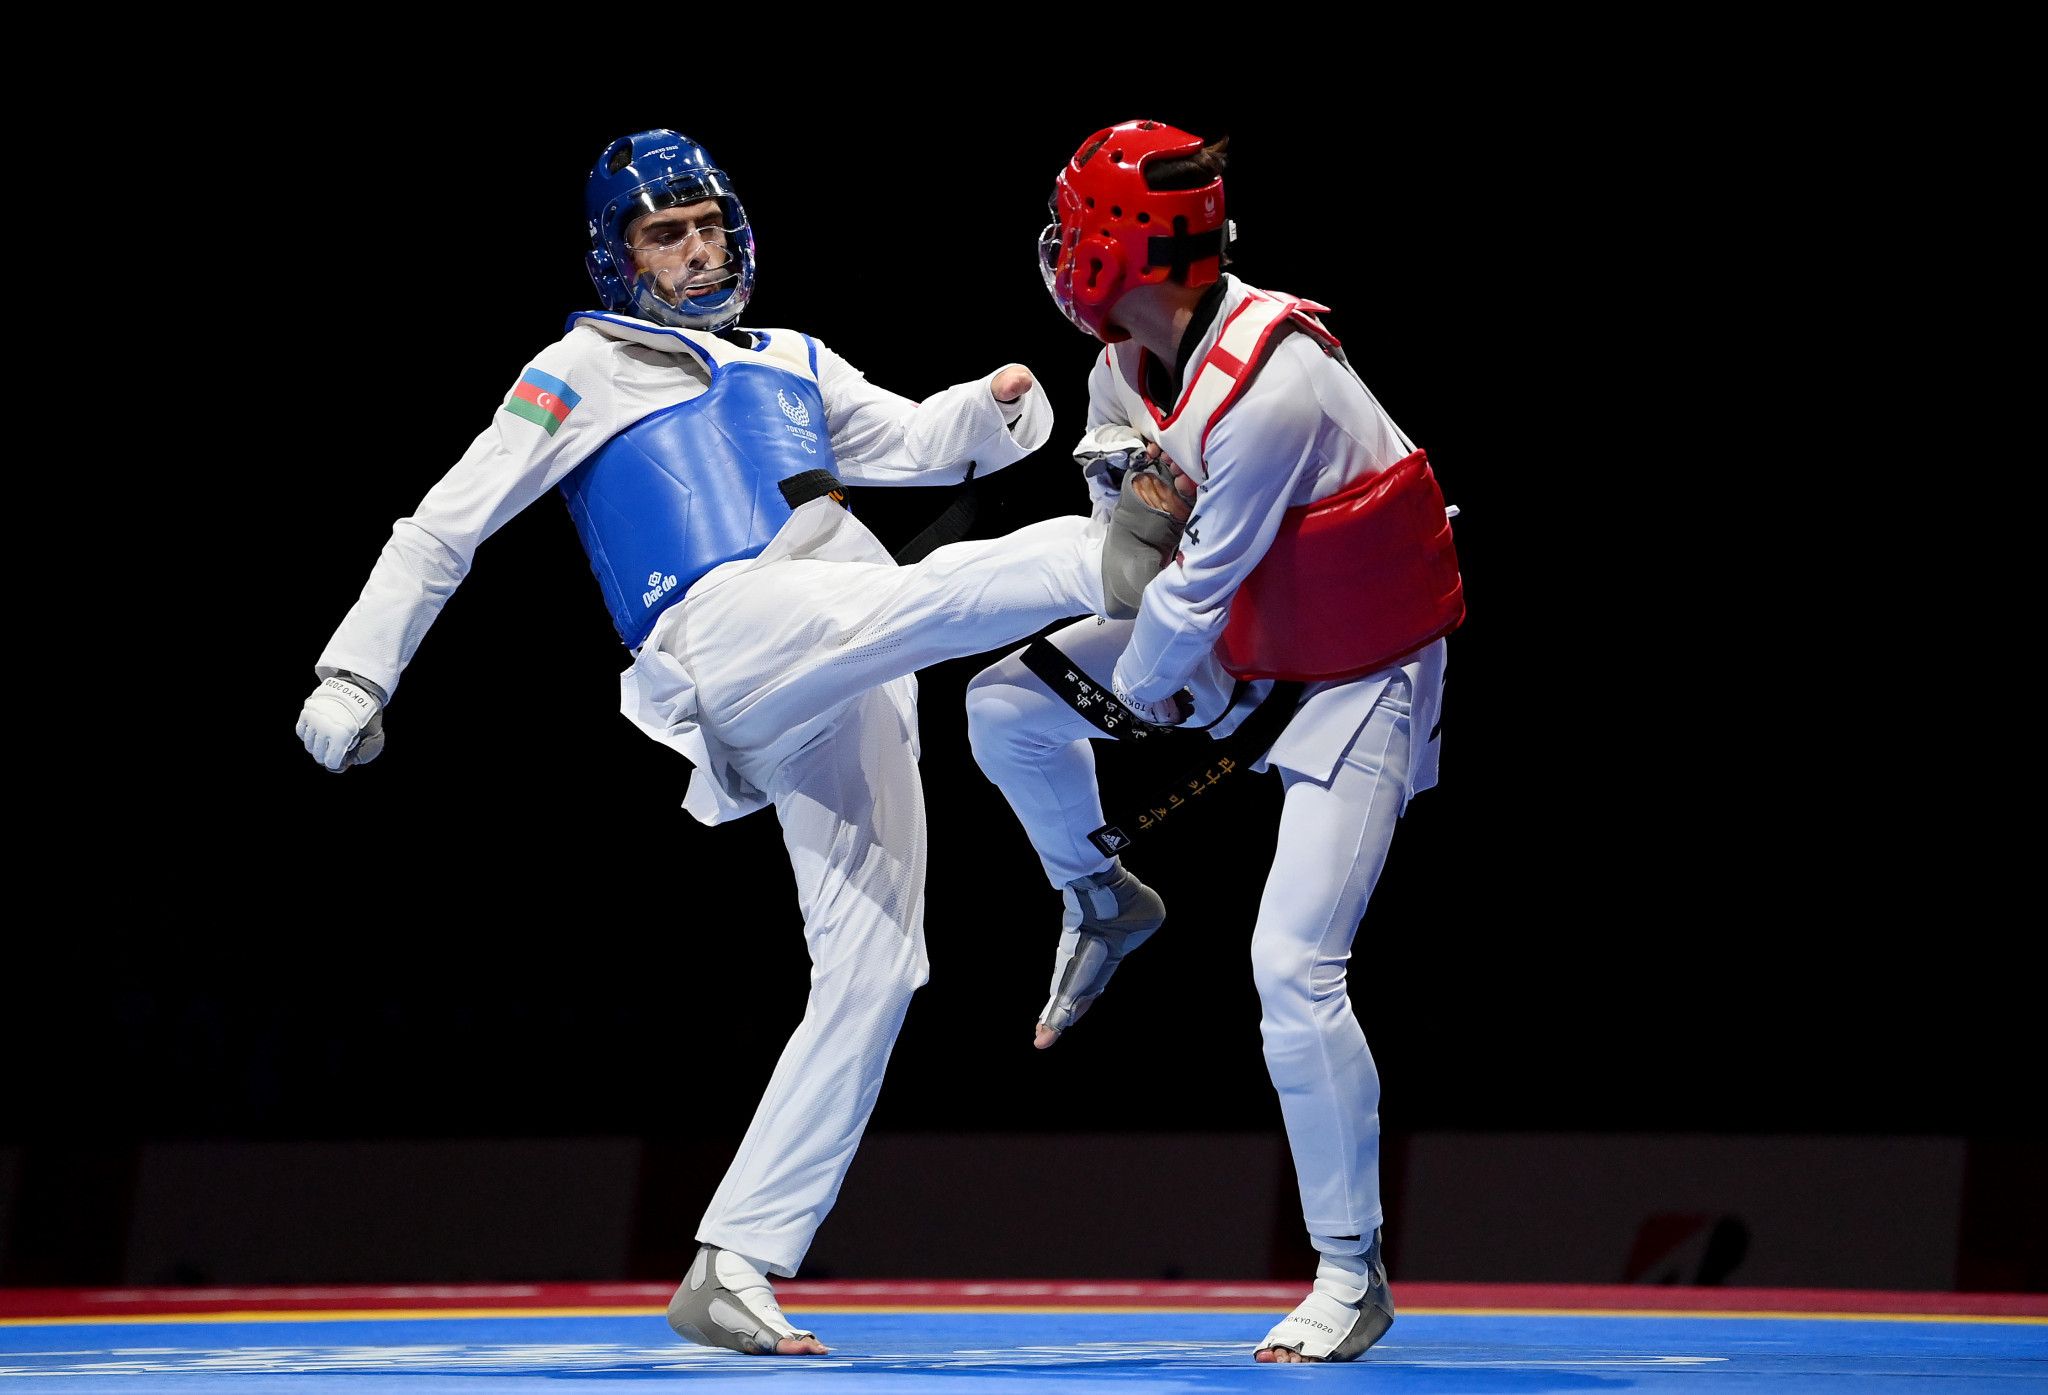 The Netherlands will be hoping for better results in Para taekwondo through more inclusive action for disabled people ©Getty Images